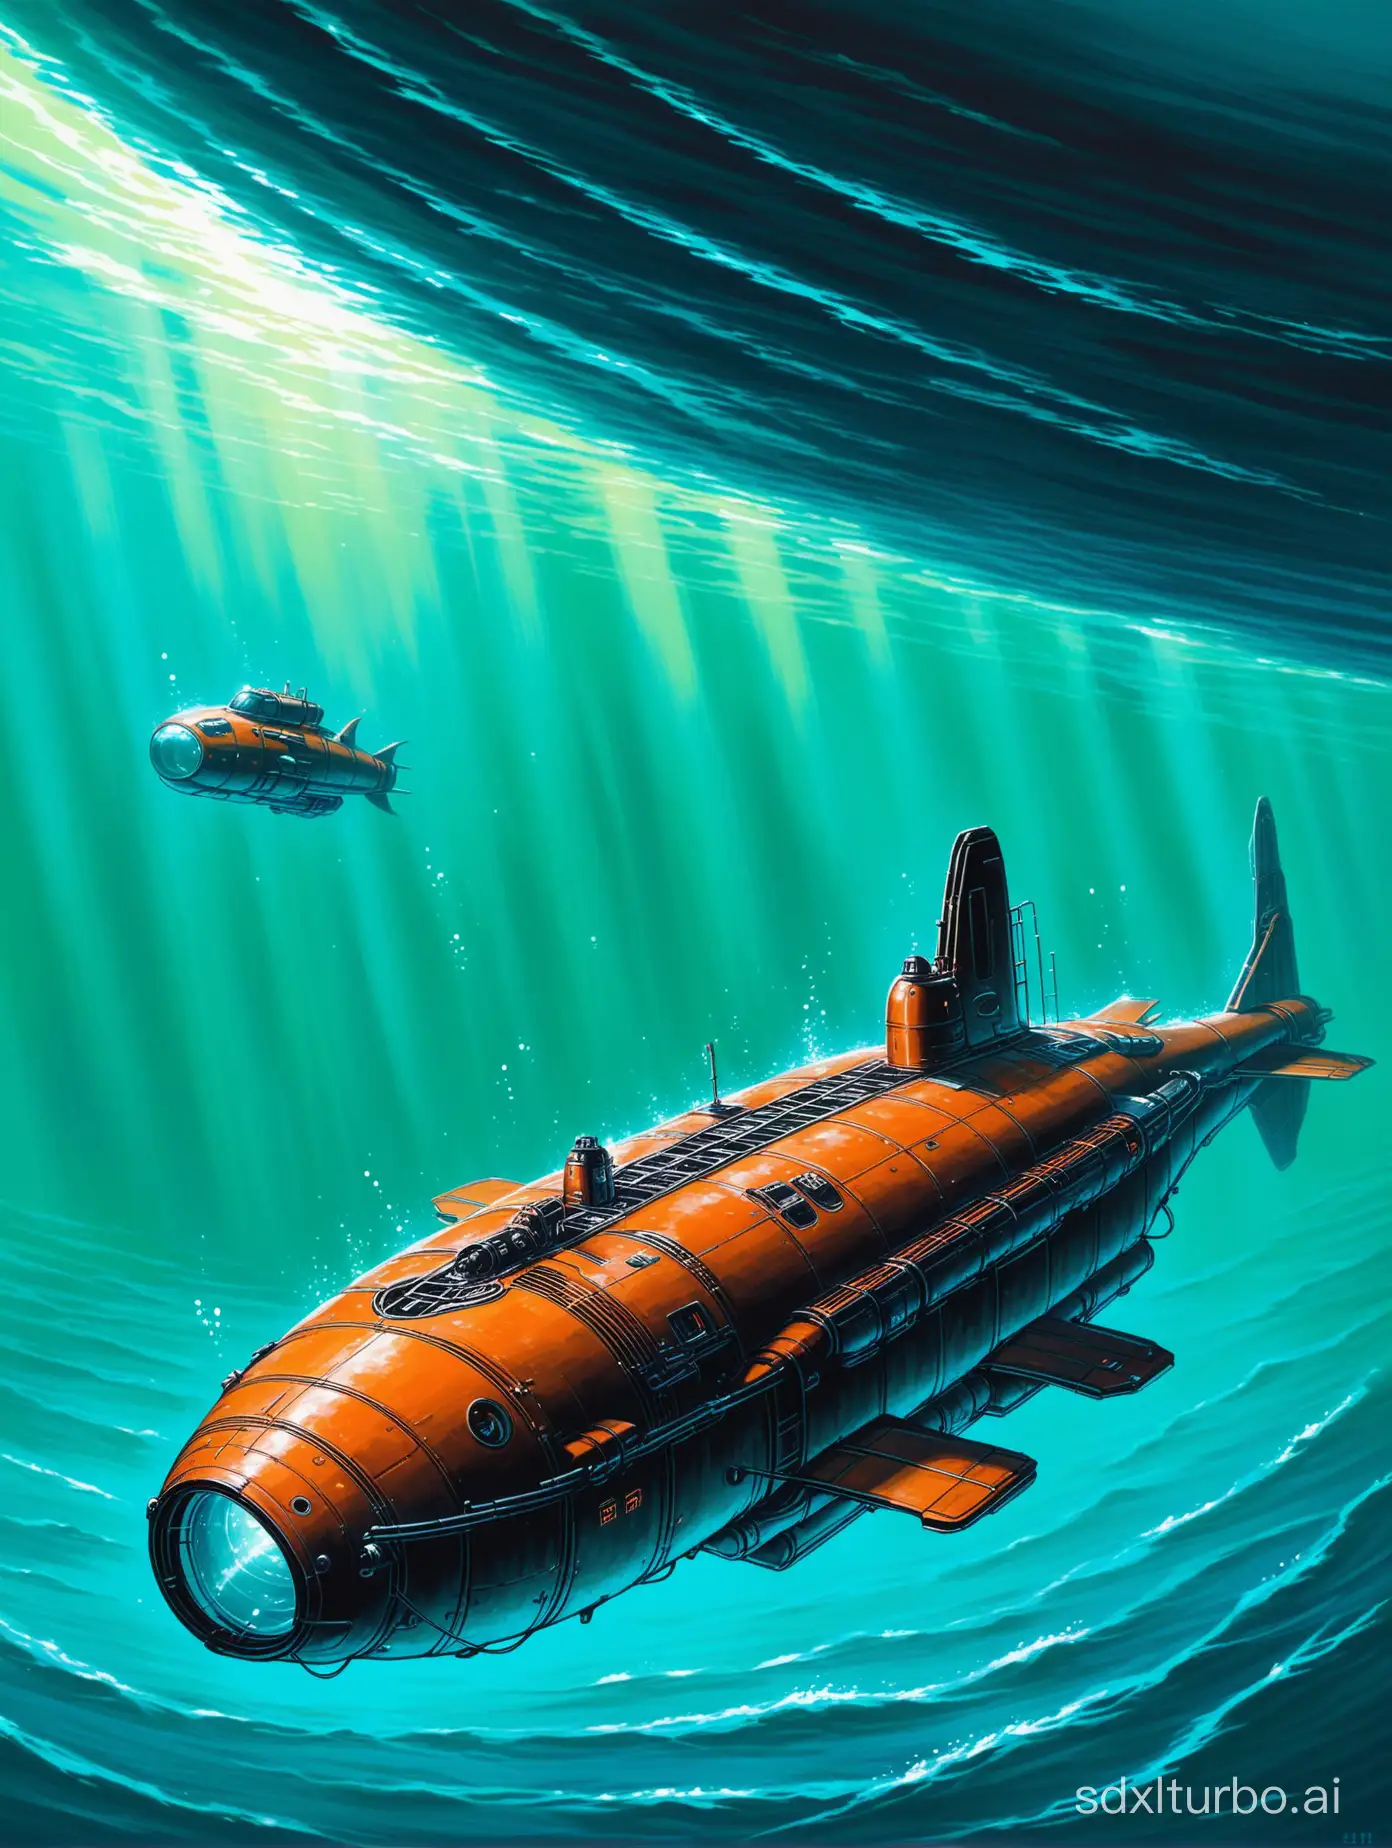 Dragon submersible sci-fi painting